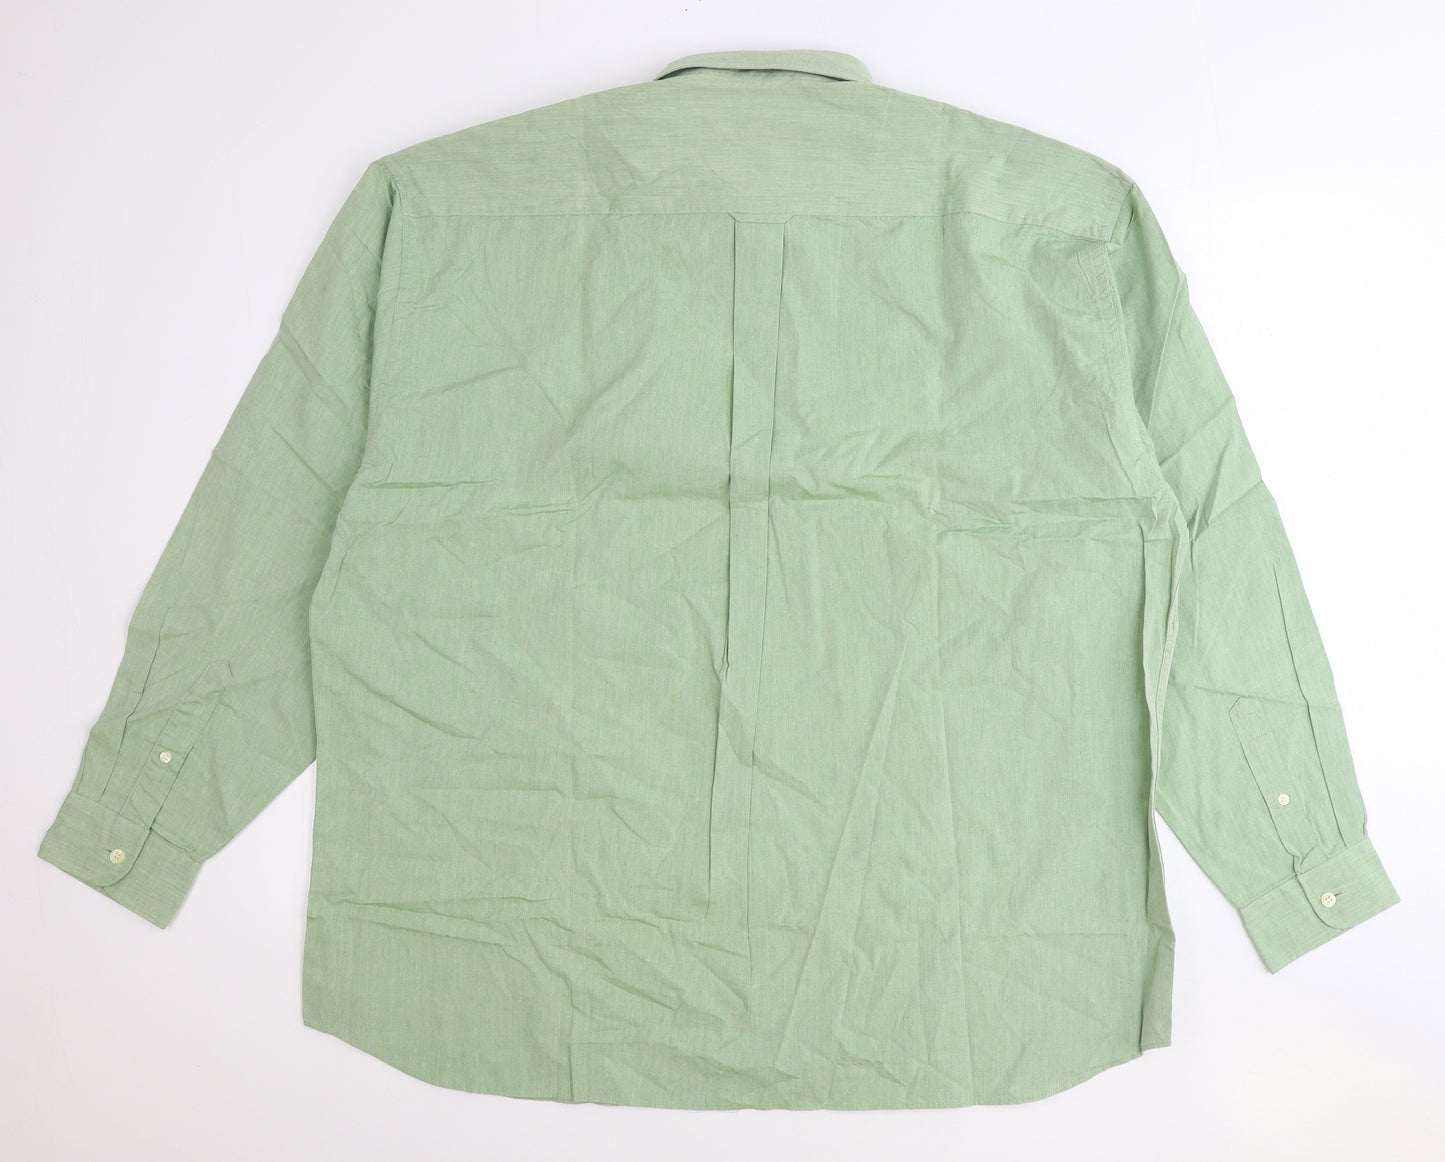 Weekender Mens Green Cotton Button-Up Size XL Collared Button